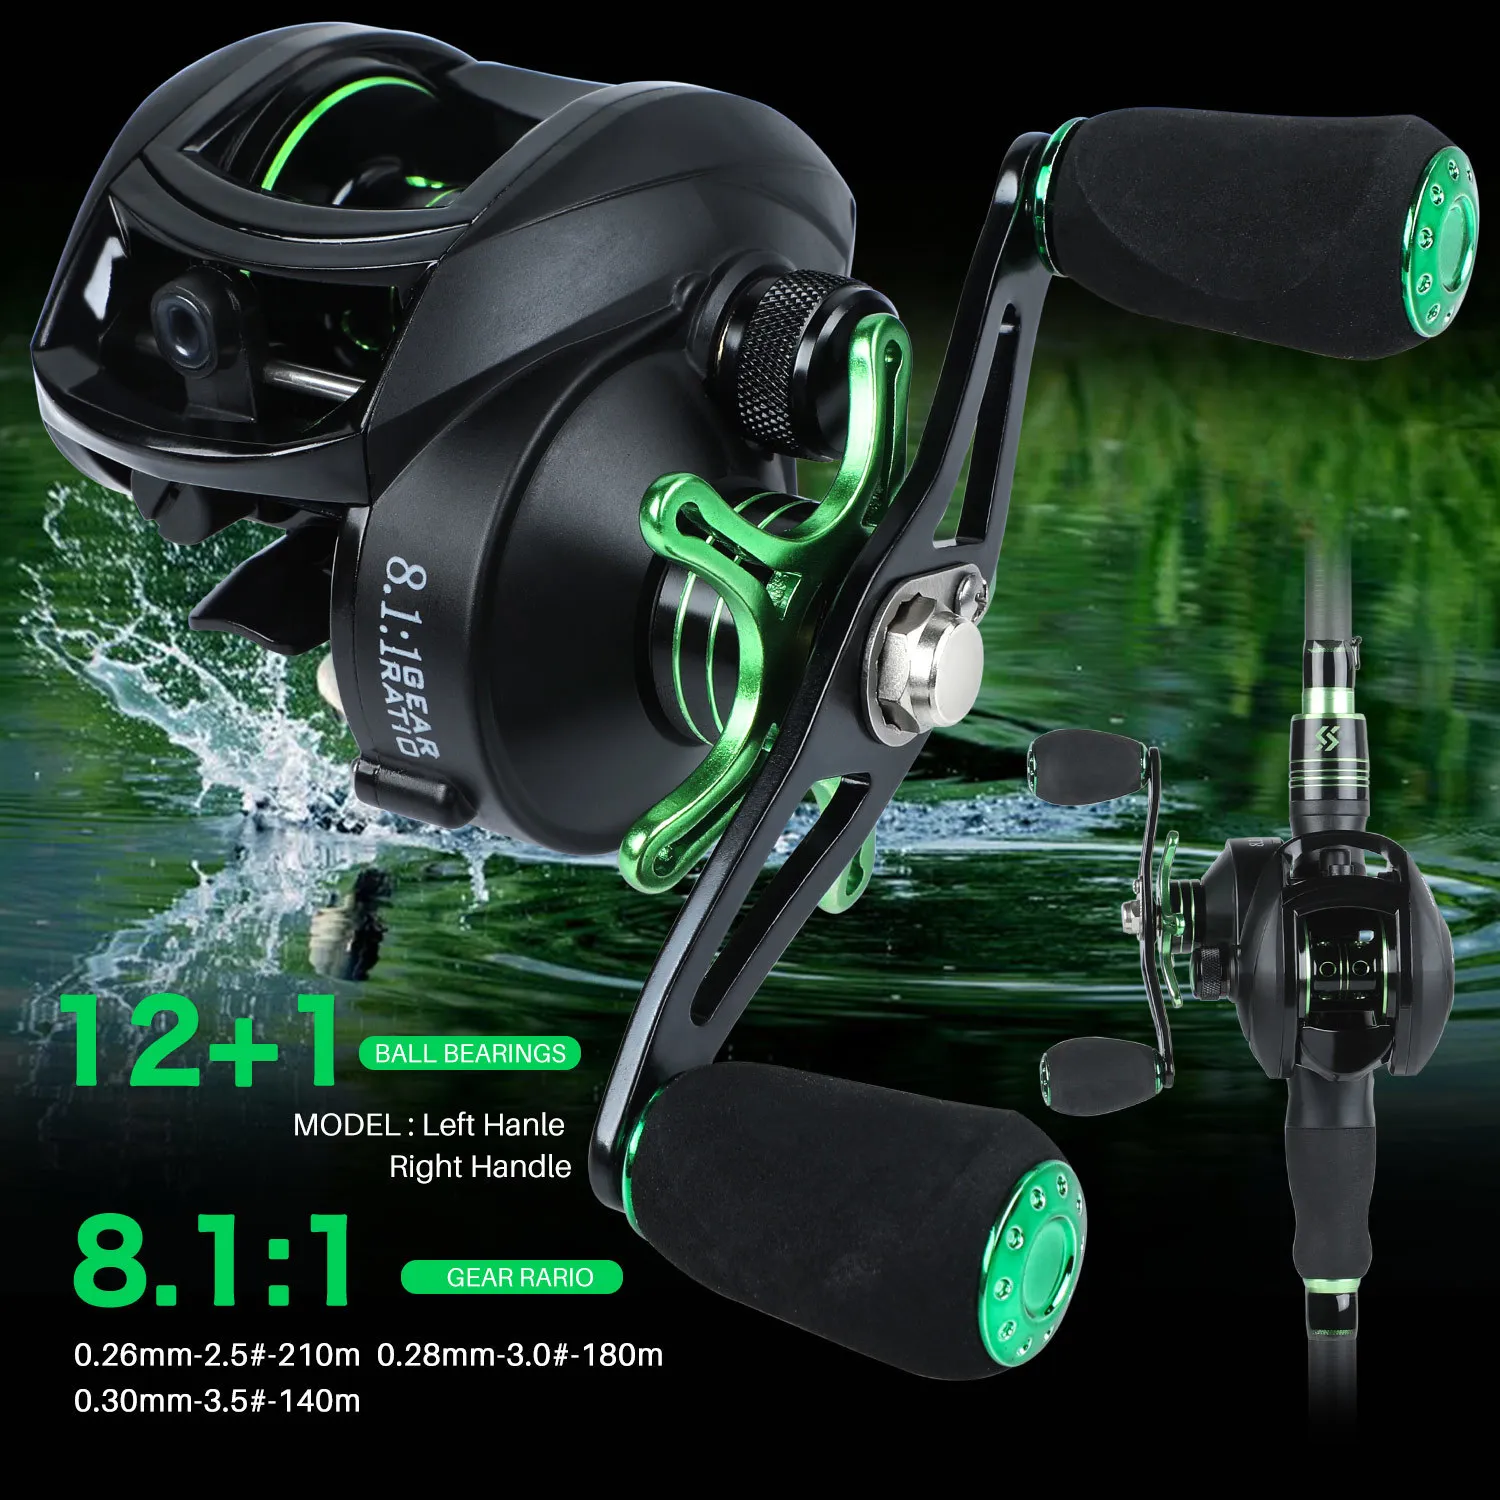 Baitcasting Reels Sougayilang Lure Fishing Reel 8.1 1 High Speed Gear Ratio  Baitcasting Reel With Aluminum Spool Max Drag 8kg For Bass Lure Pesca  230403 From Nian07, $23.23